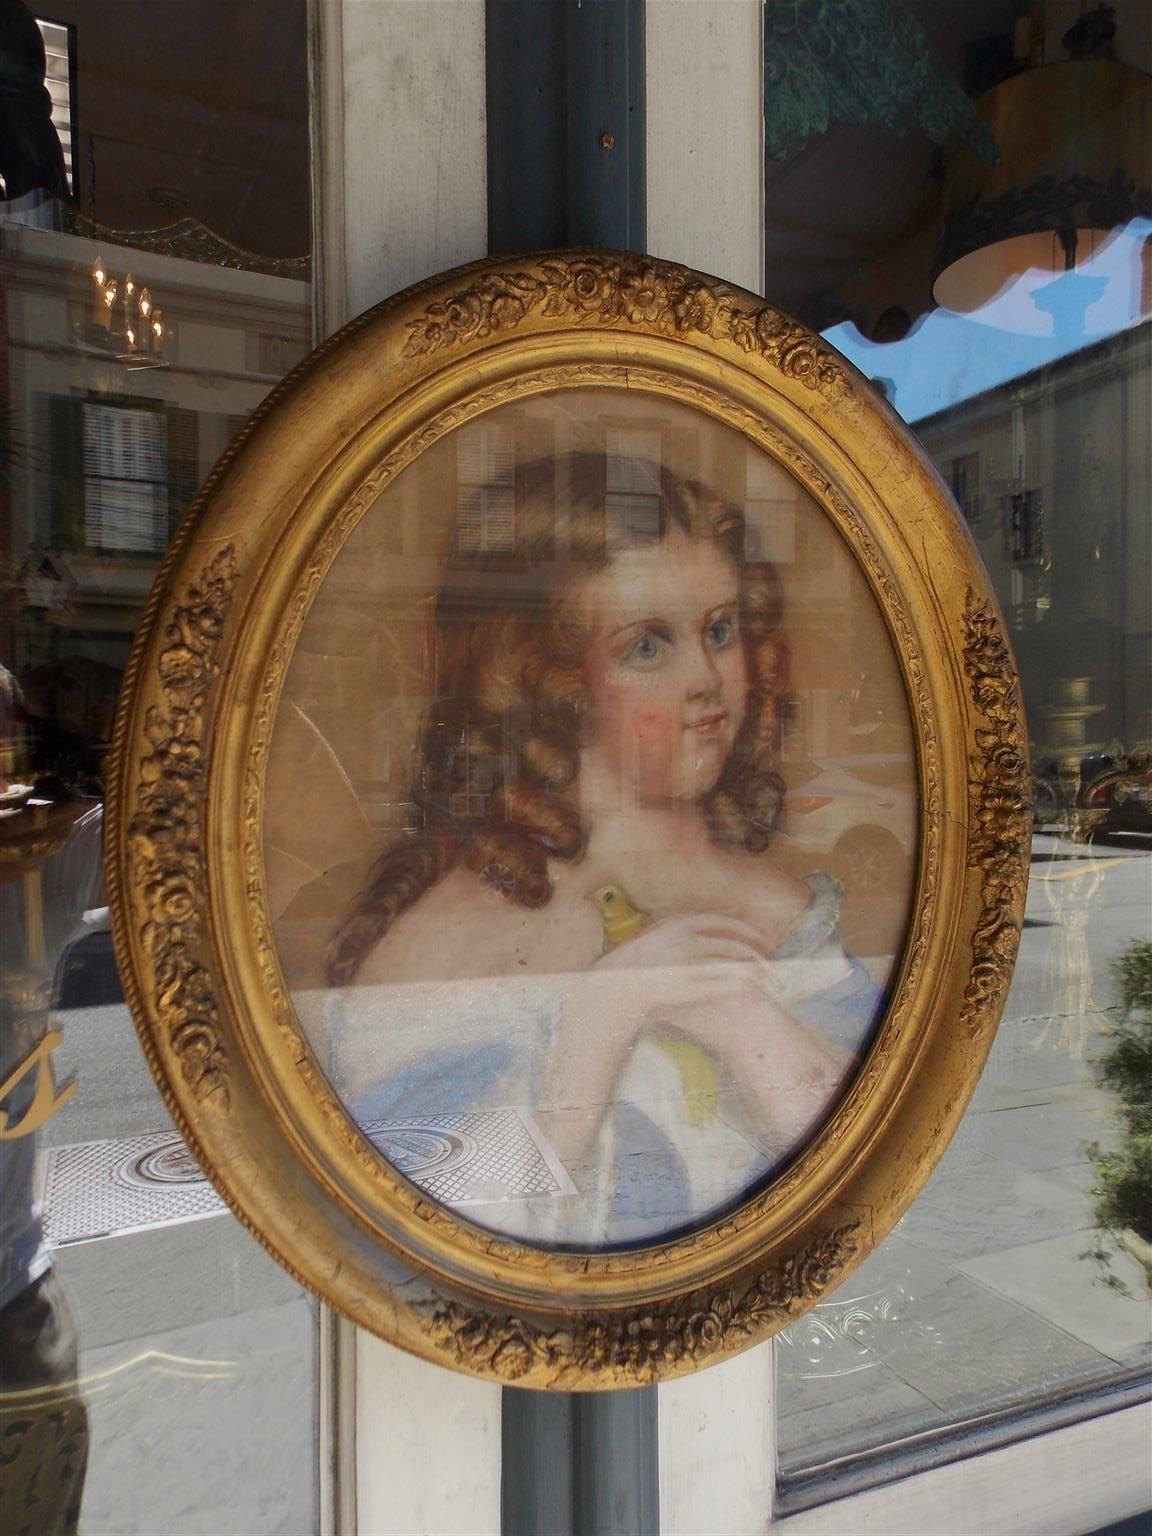 American pastel of young lady grasping dove in the original oval floral gilt frame presented under glass, Mid 19th Century. Original paper label on back.
Ursuline Convent, Valle Crucis, Columbia, SC.

During the Civil War Sherman’s generals were